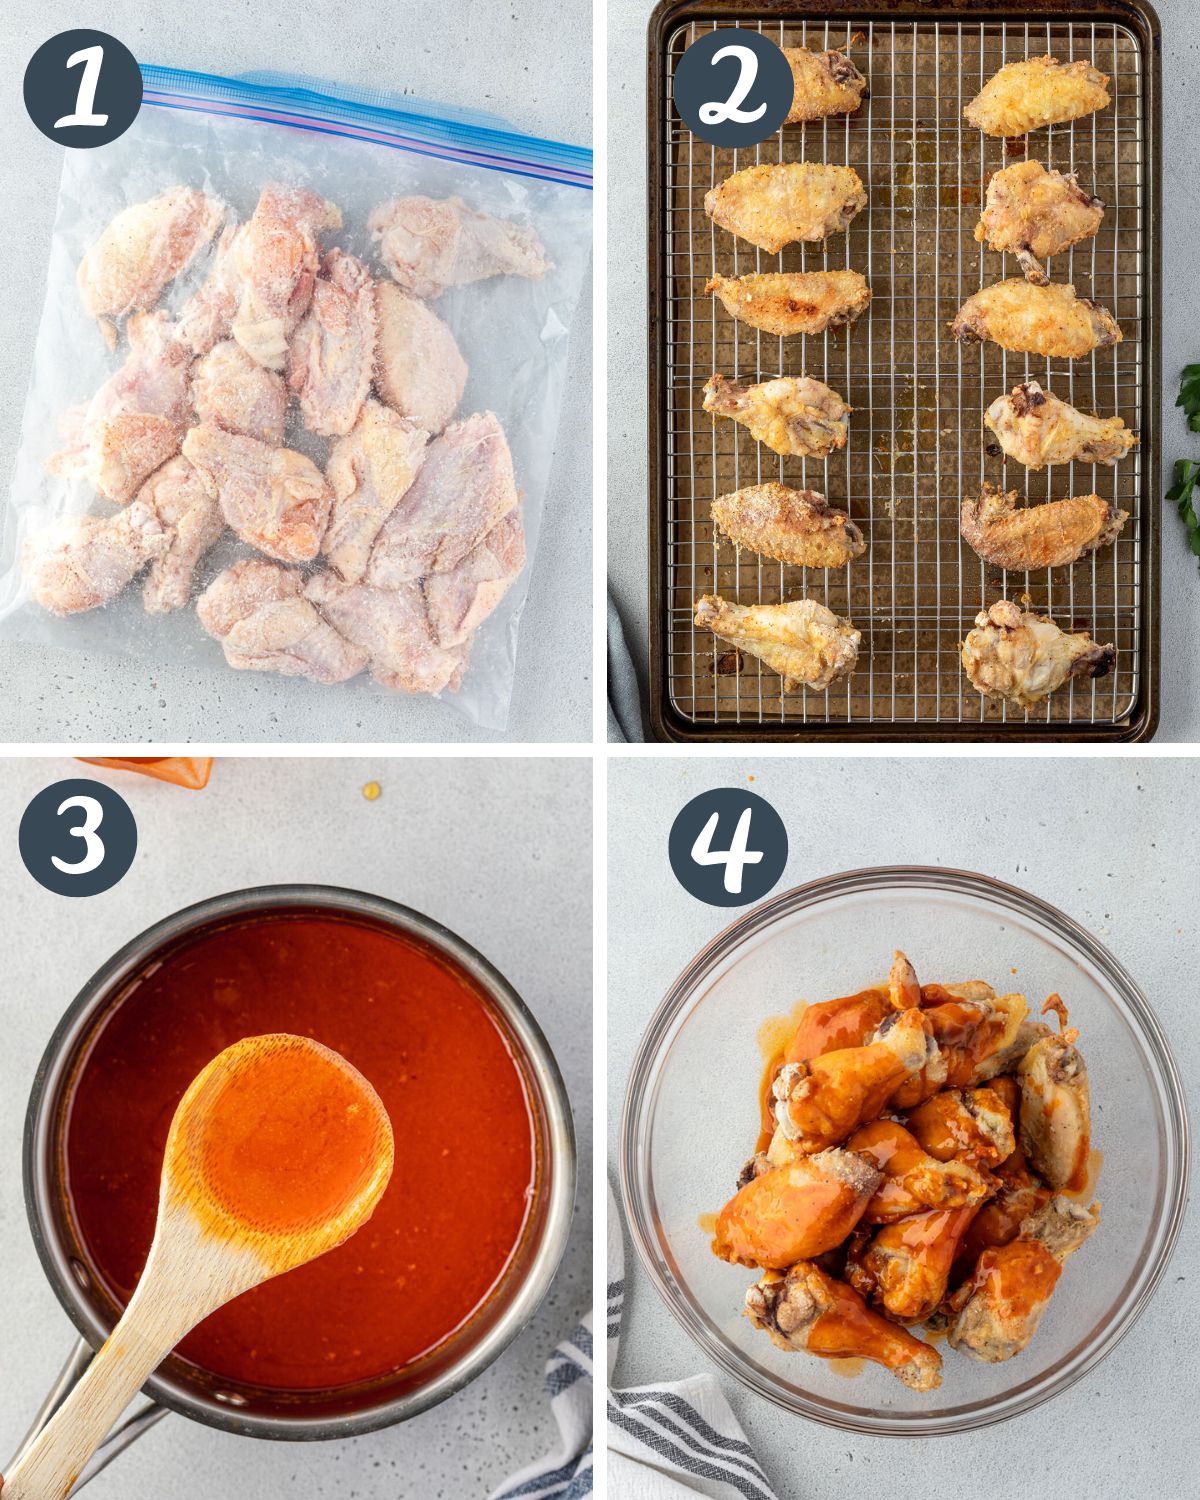 4 images showing the steps to make the recipe including wings in clear bag, on sheet pan, sauce in pan, and sauce poured over wings in bowl.